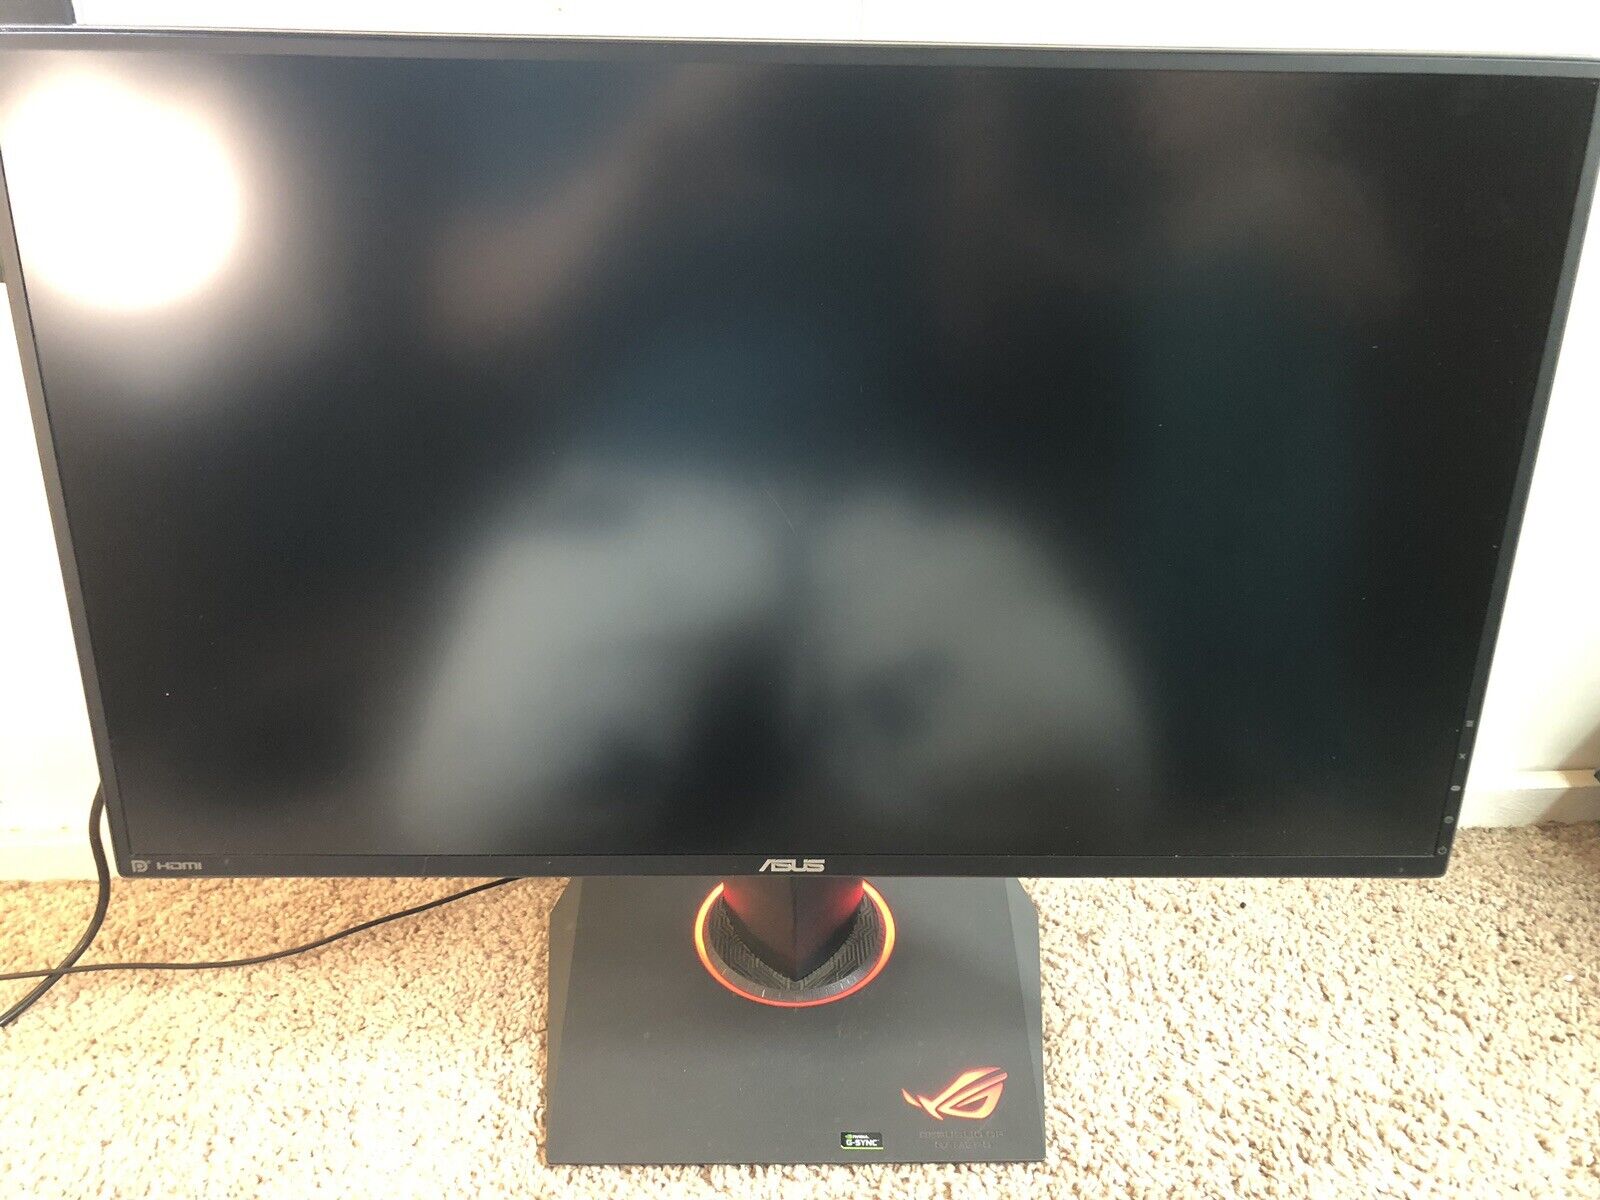 ASUS ROG Swift PG279Q 27 inch Widescreen LED Monitor